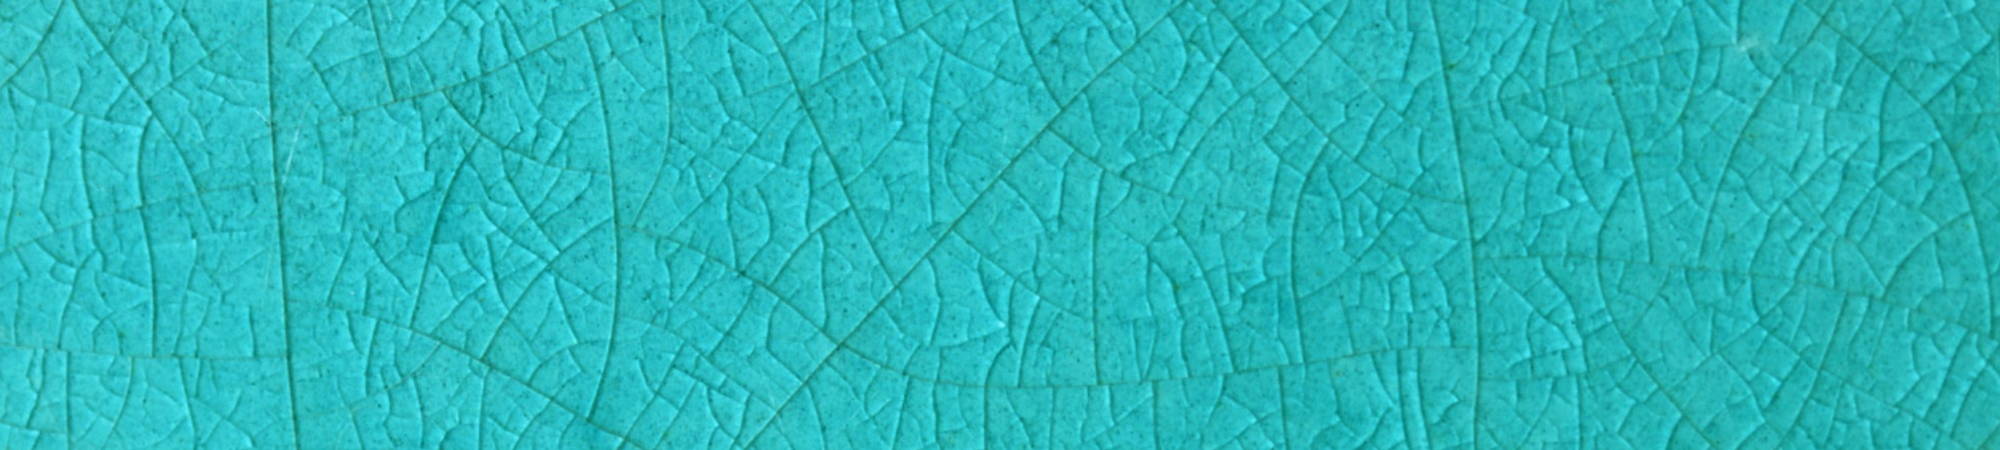 Teal  coloured abstract back gound image